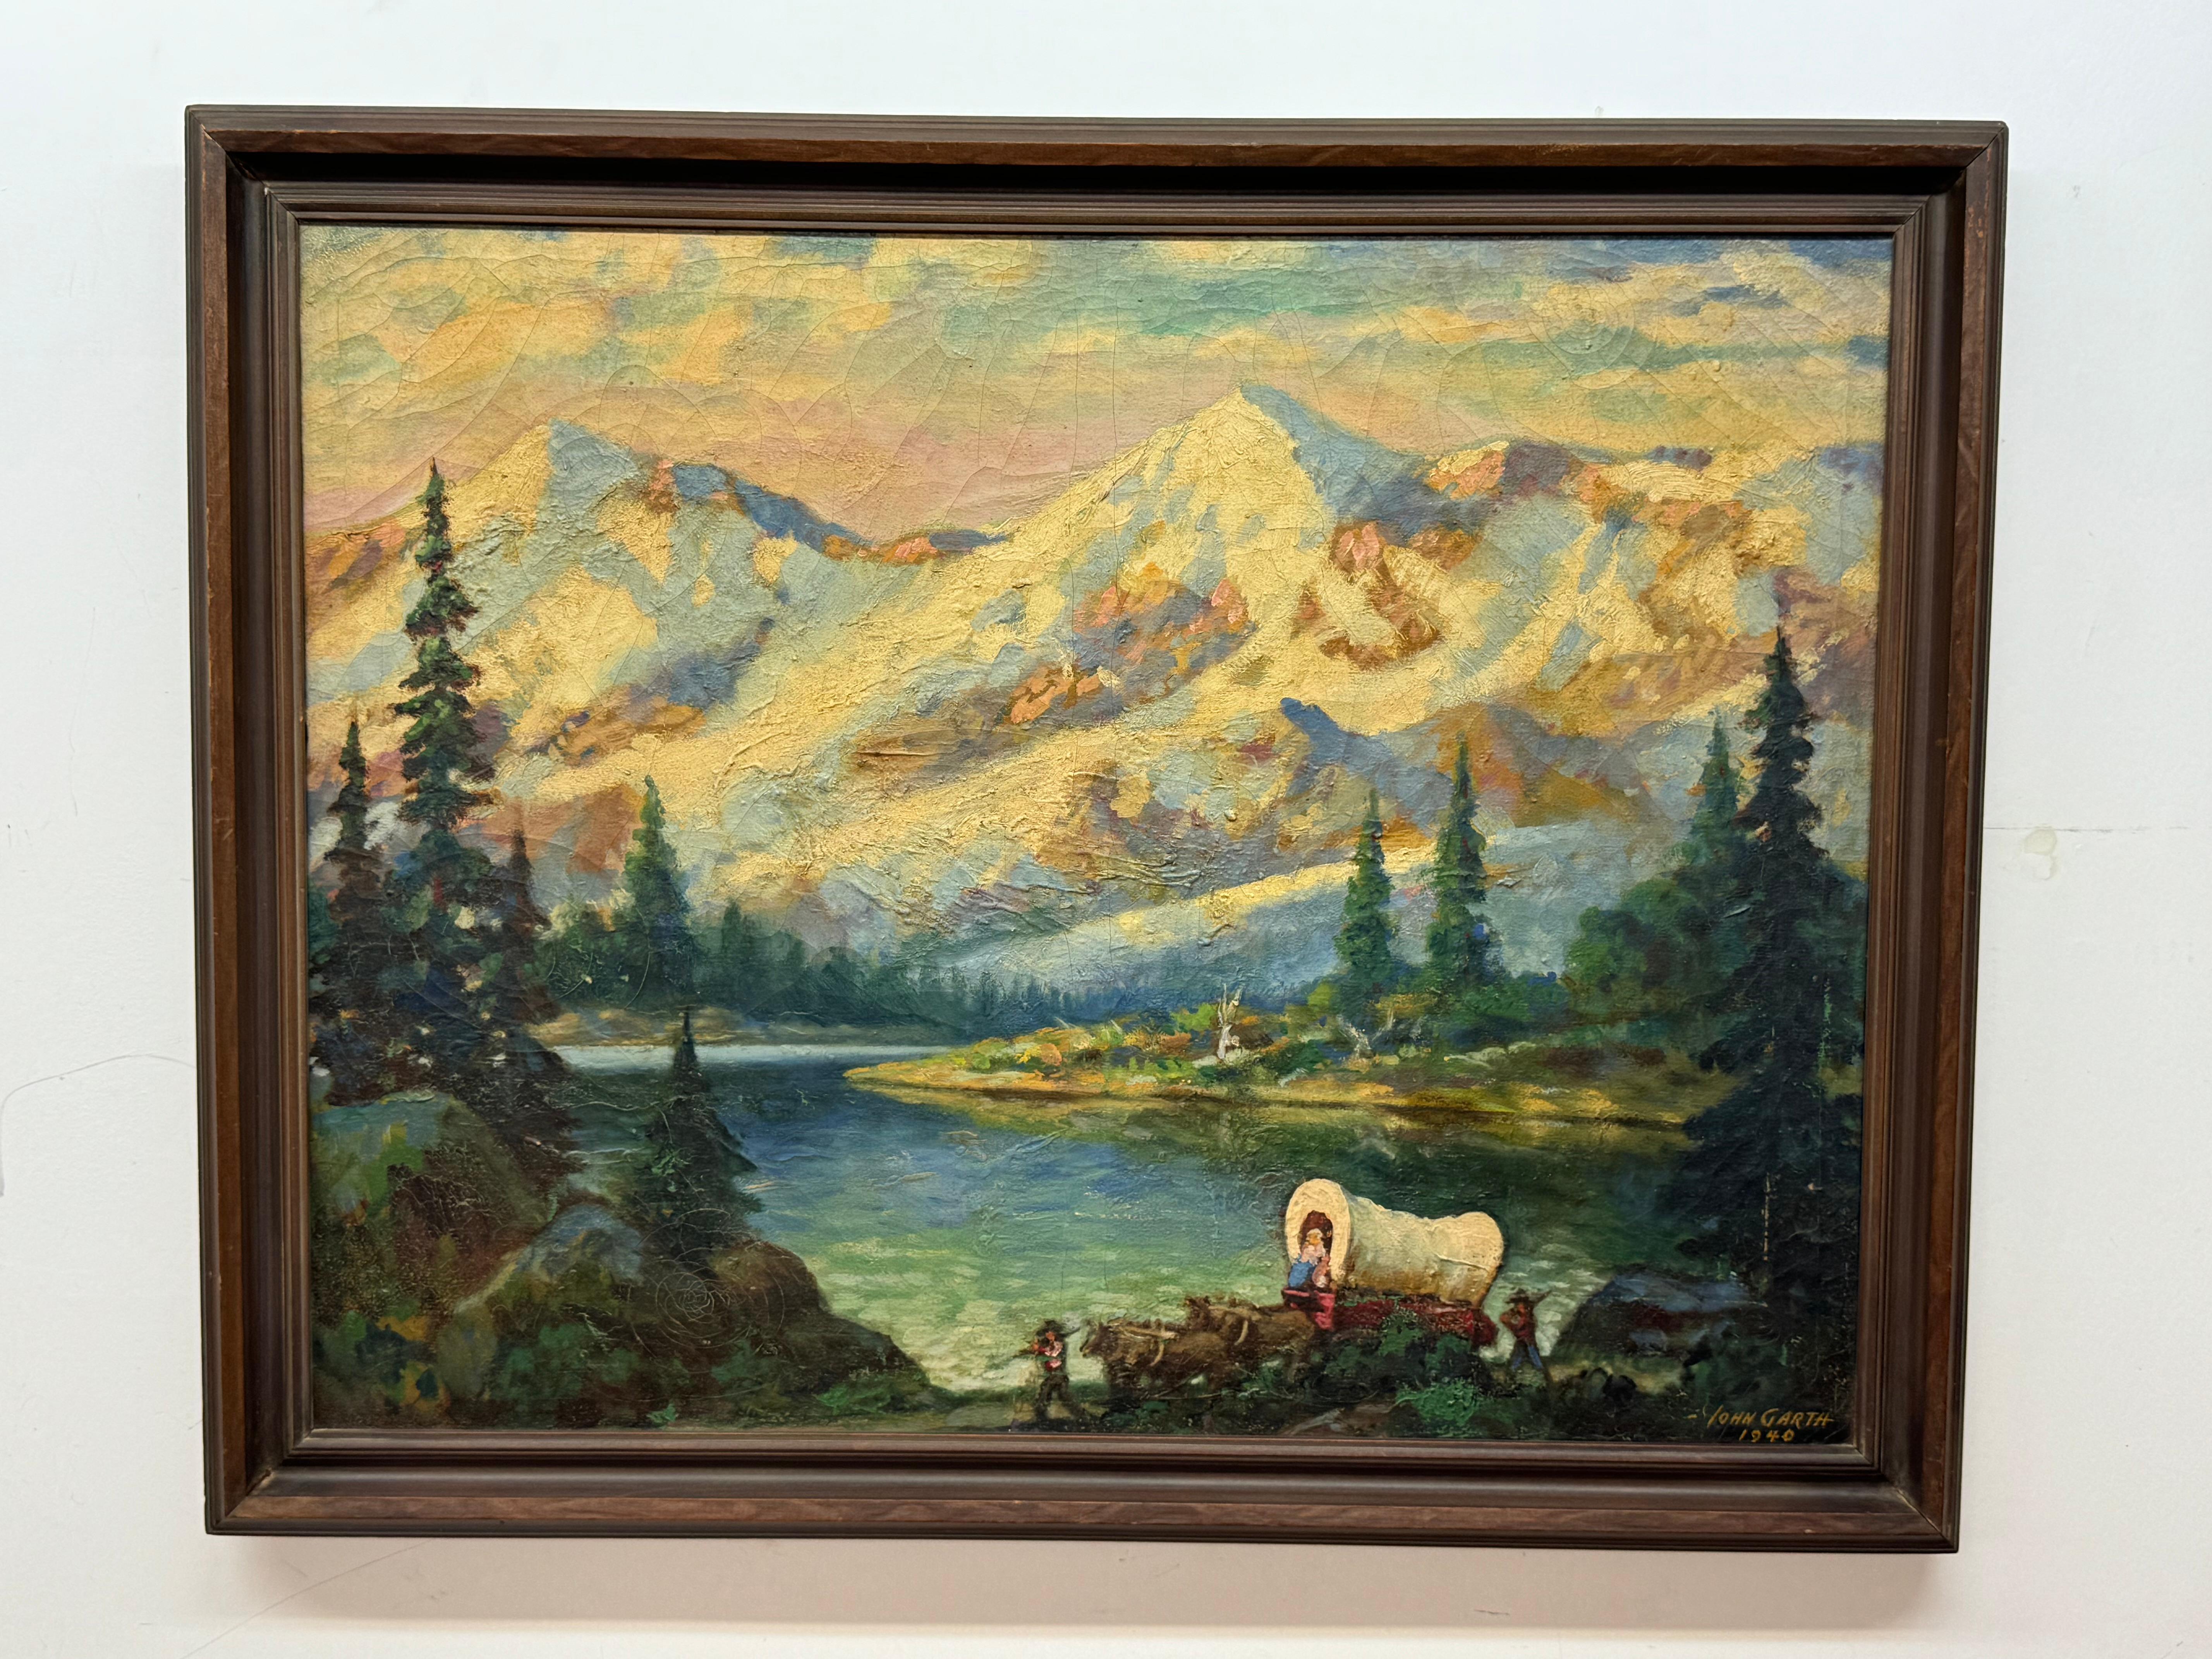 John Garth (1889-1971) Mountain landscape painting with lake and Travelers

Oil on canvas

1940

22 x 28.5 unframed, 27.75 x 31.75 framed

